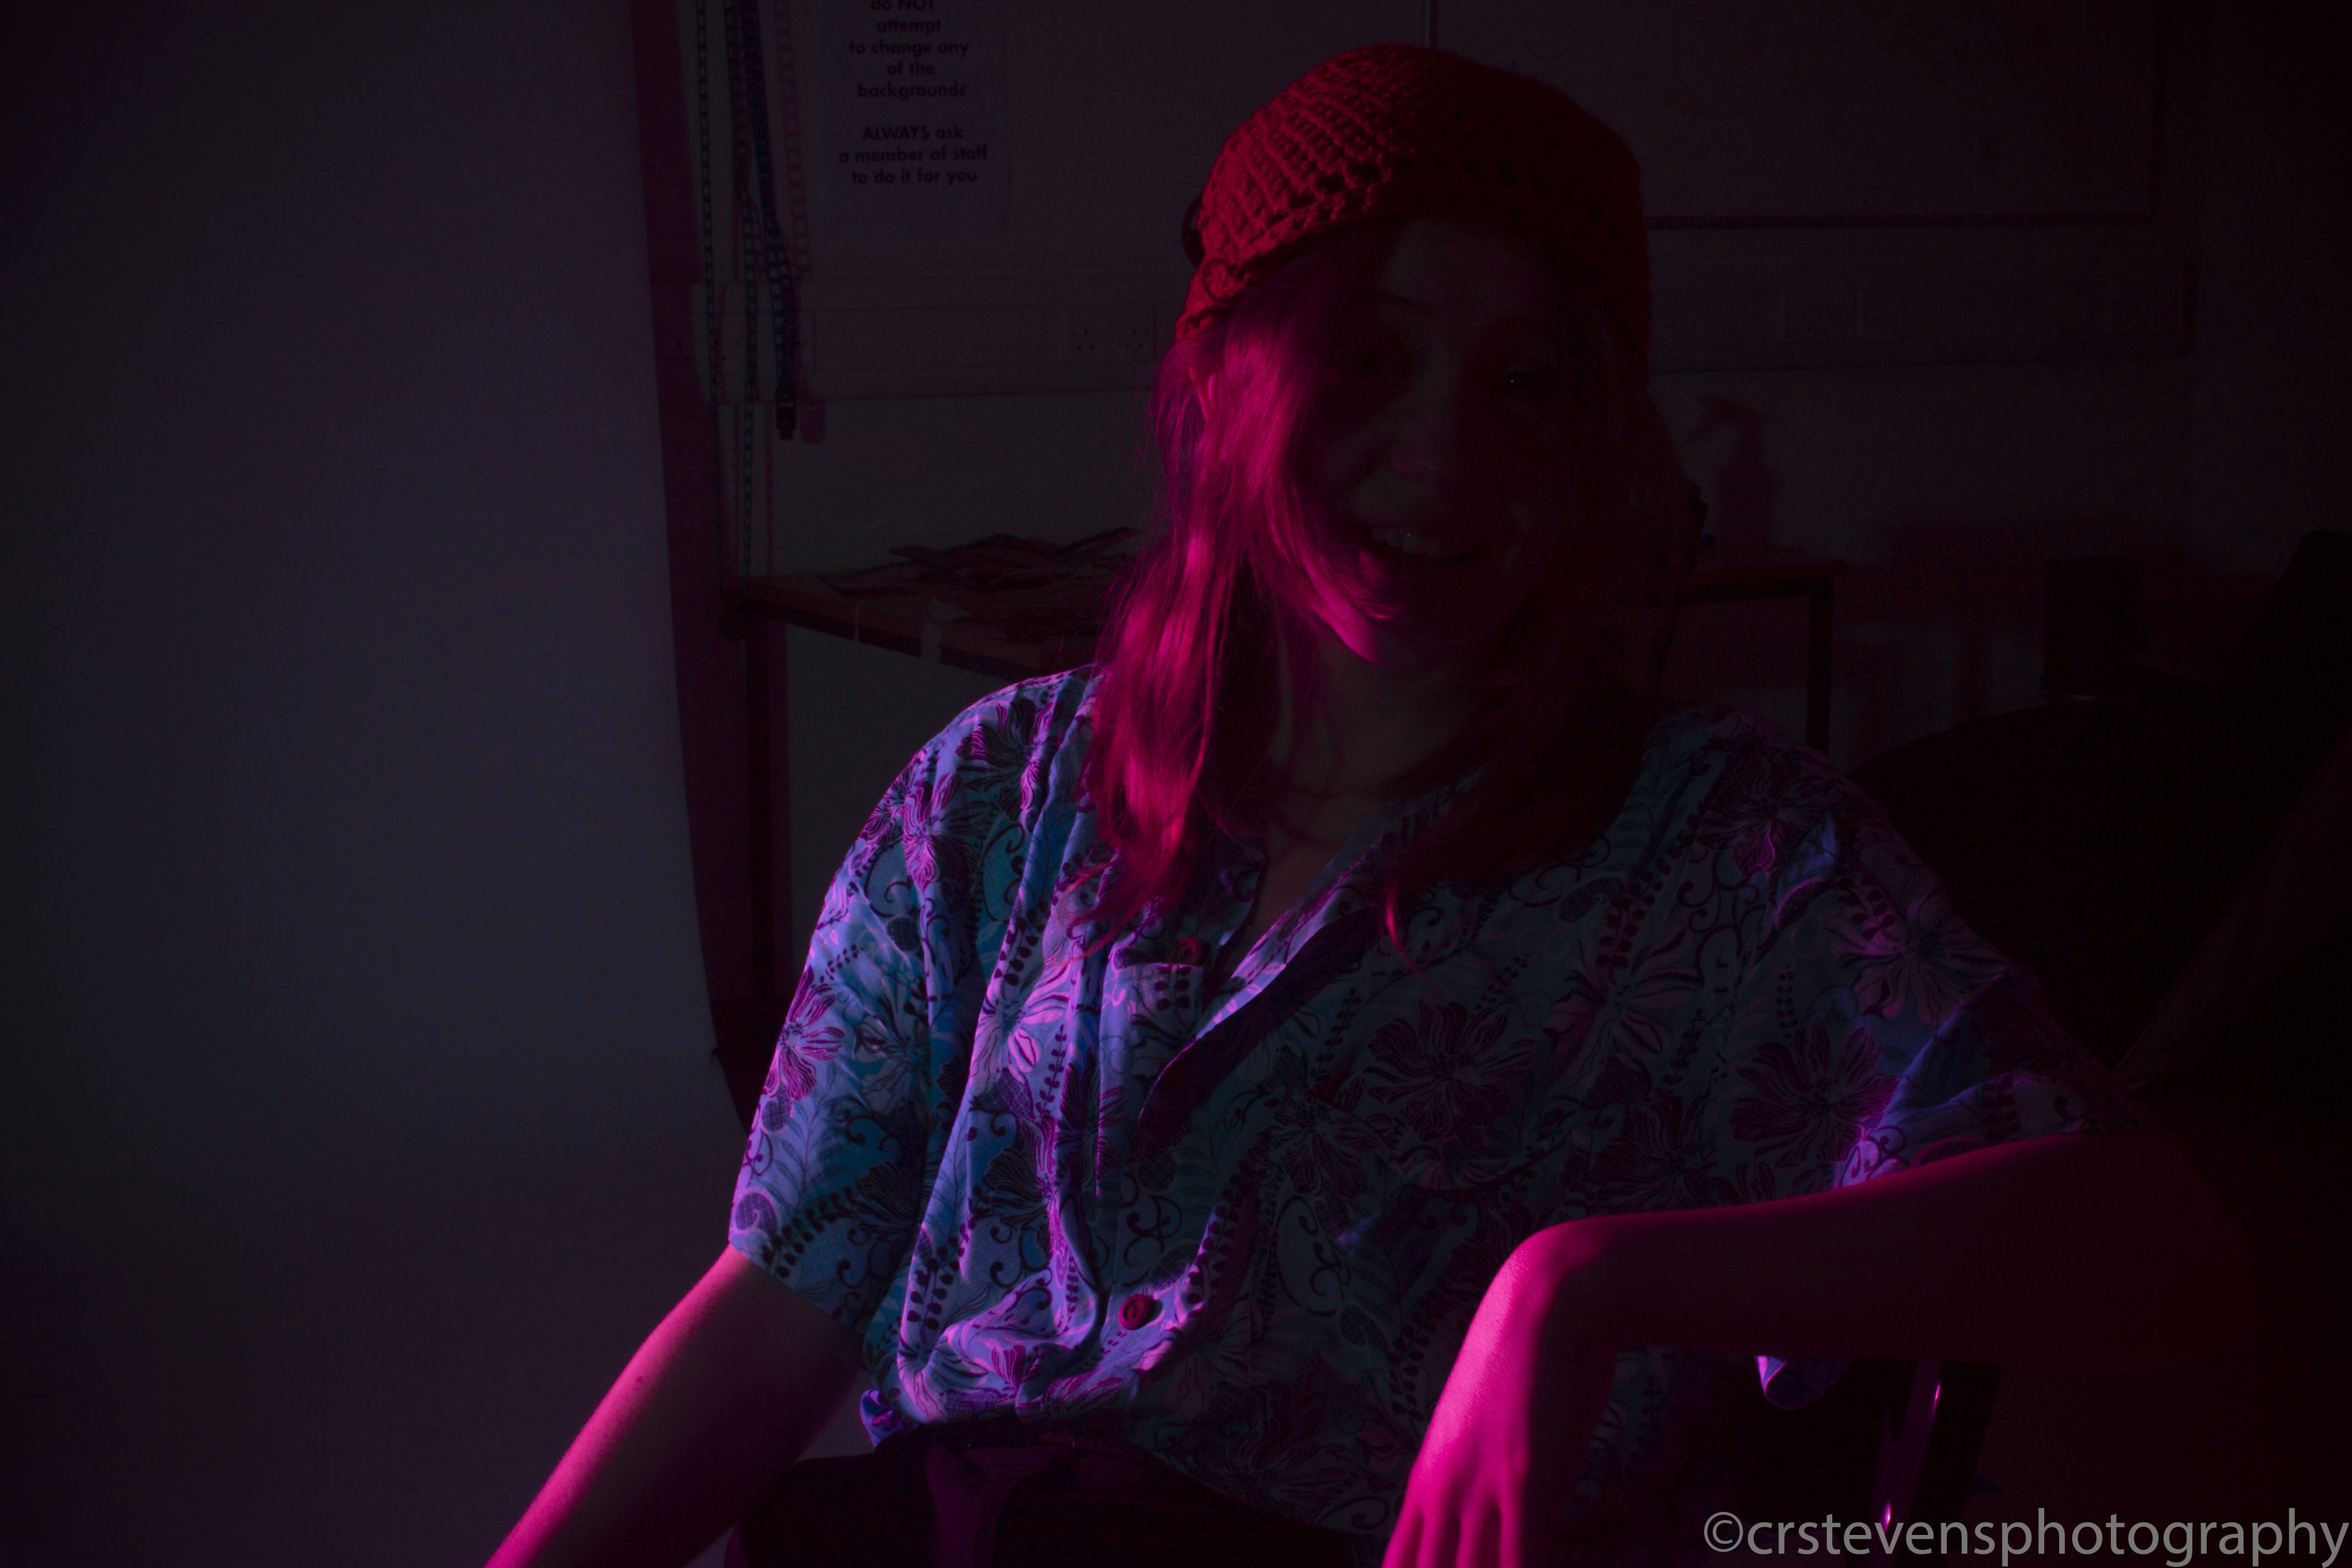 a person with a beanie and a patterned shirt in bisexual lighting leaning to one side with their face hidden